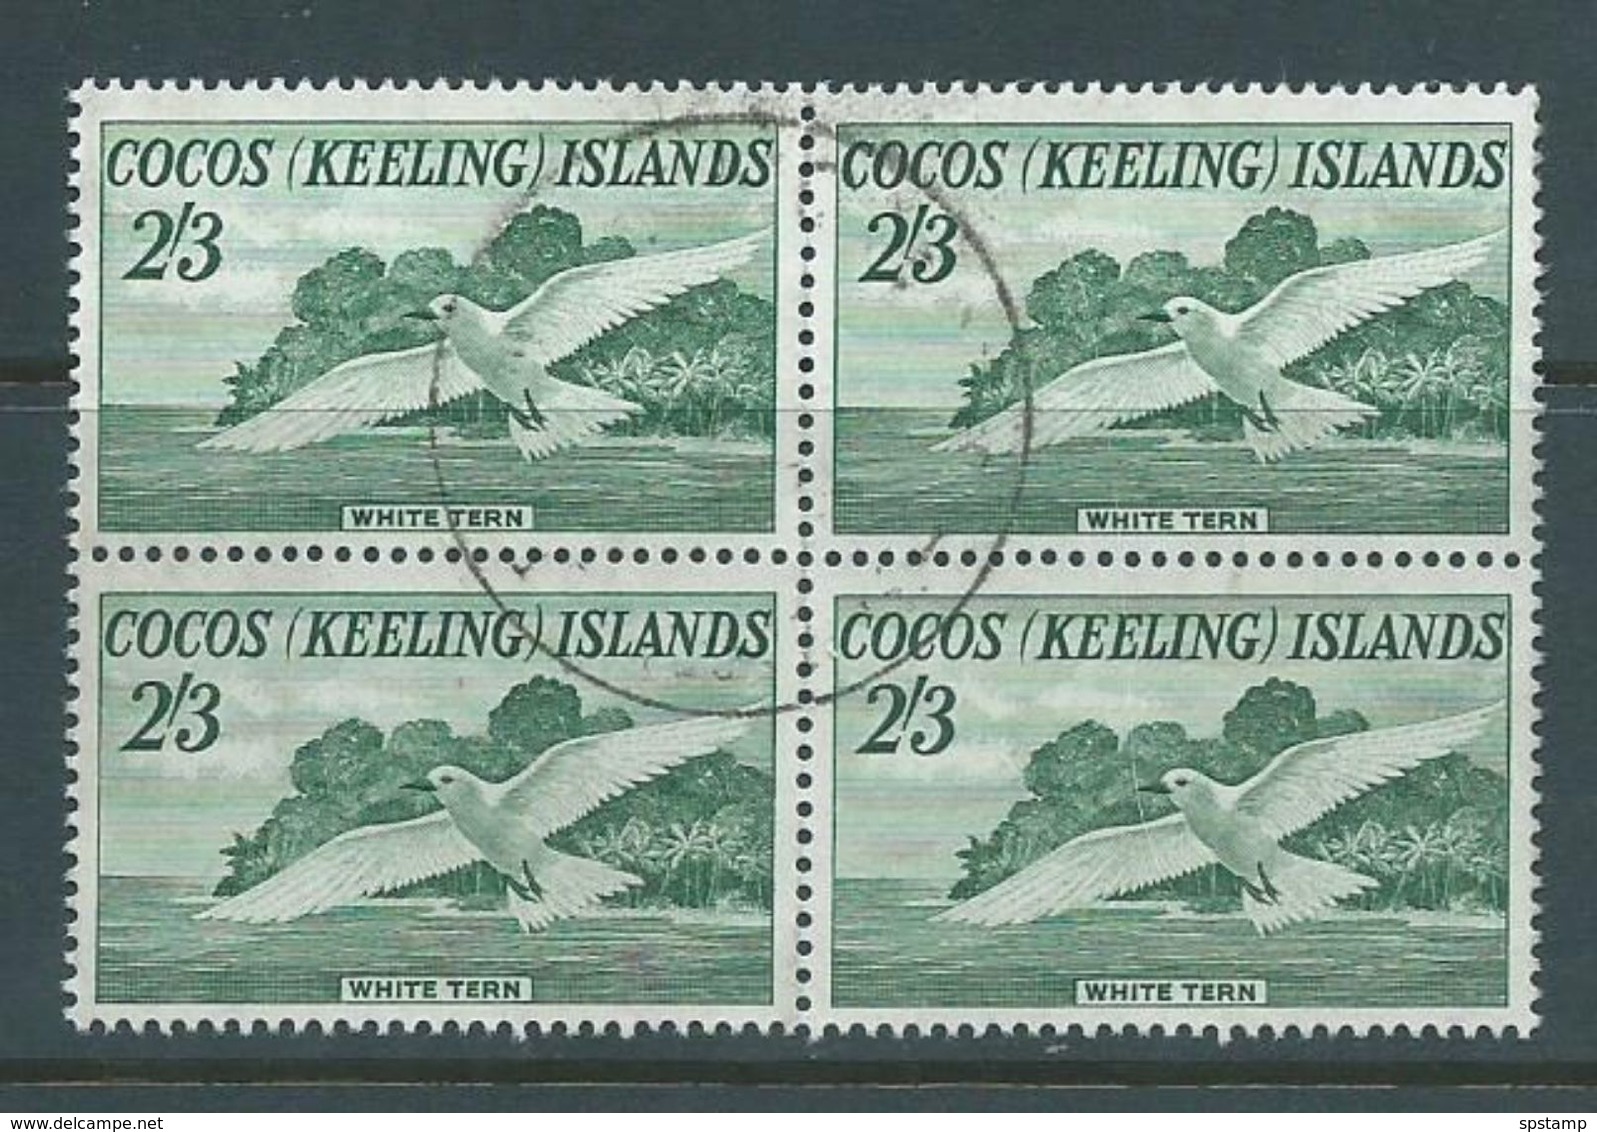 Cocos Keeling Island 1963 2/3 Tern Bird Definitive Block Of 4 Commercially FU , 1 Unit With Small Red Wine? Stain - Cocos (Keeling) Islands